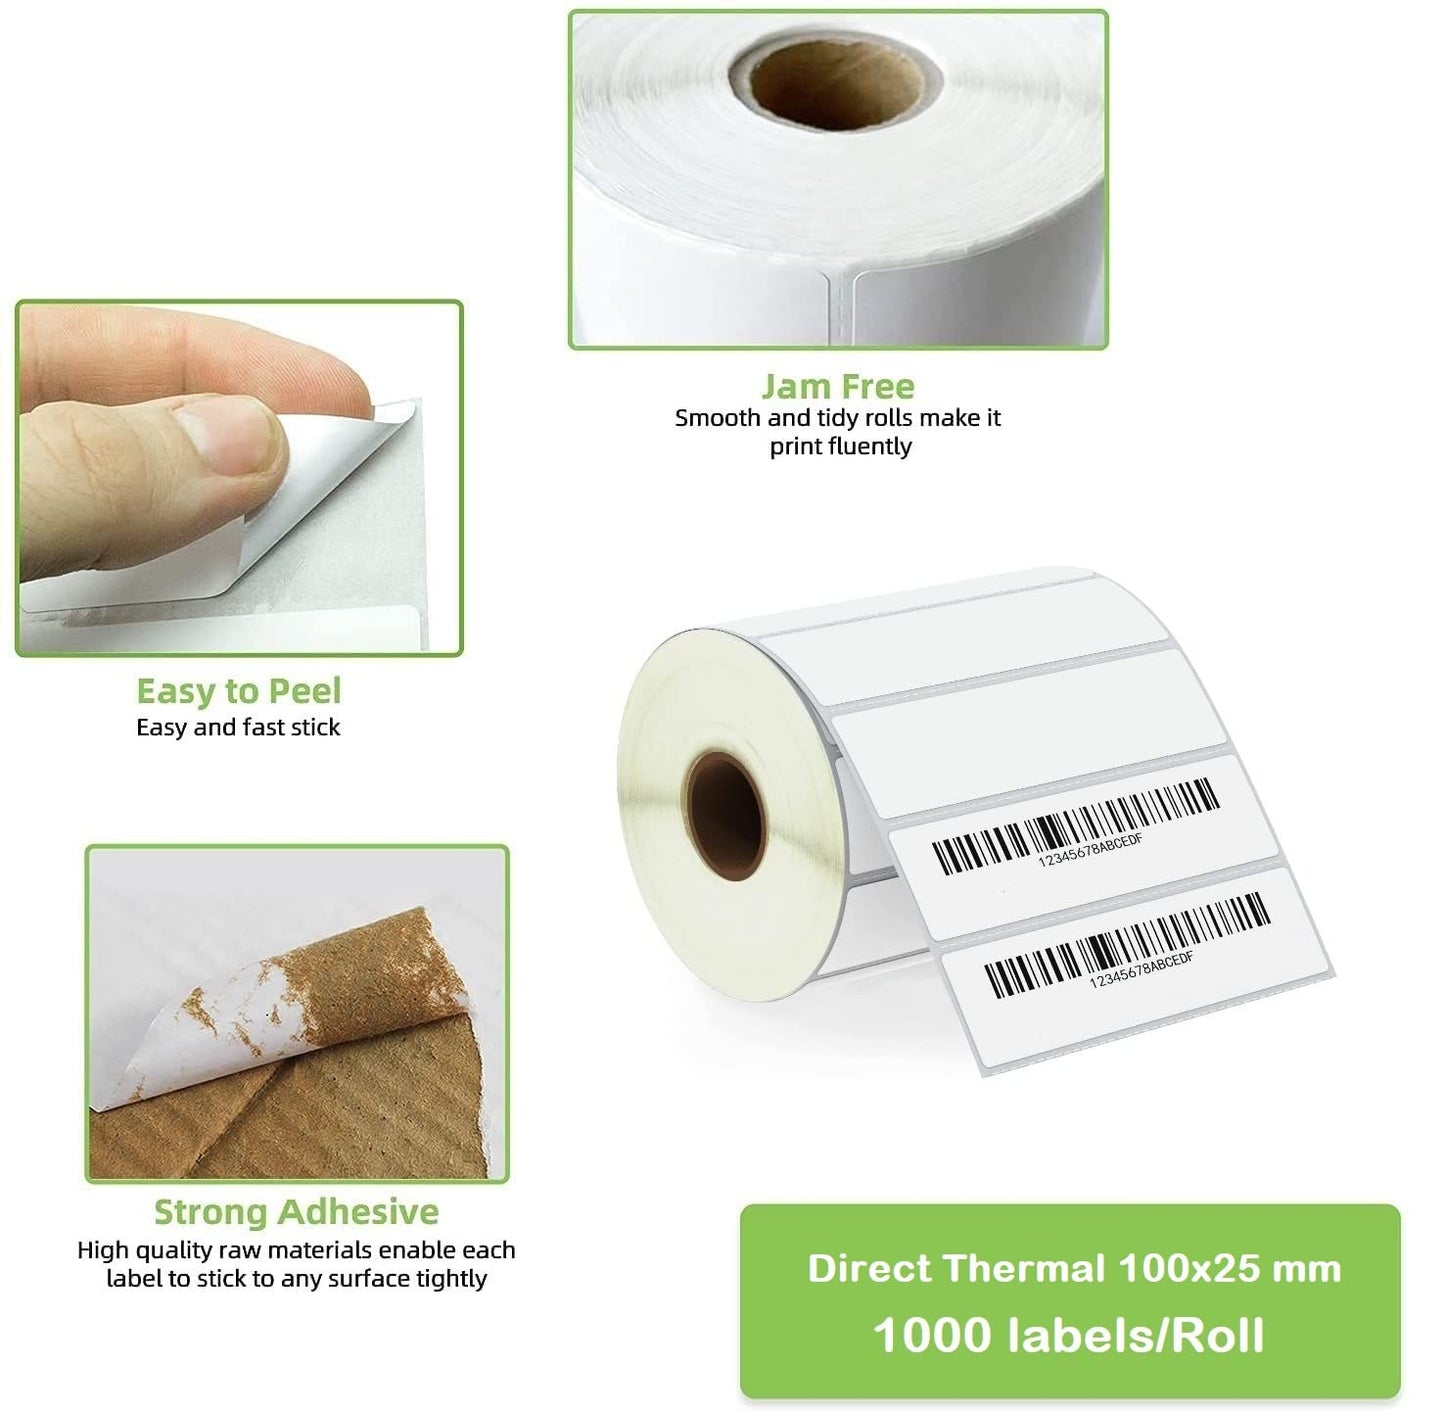 KIYA 100X25 Barcode Label Sticker  - 100mm x 25mm - 1 Ups - 500 Labels Per Roll - White Self Adhesive Sticker for Printing Barcoding (1 Roll Per Pack (1000 Labels))